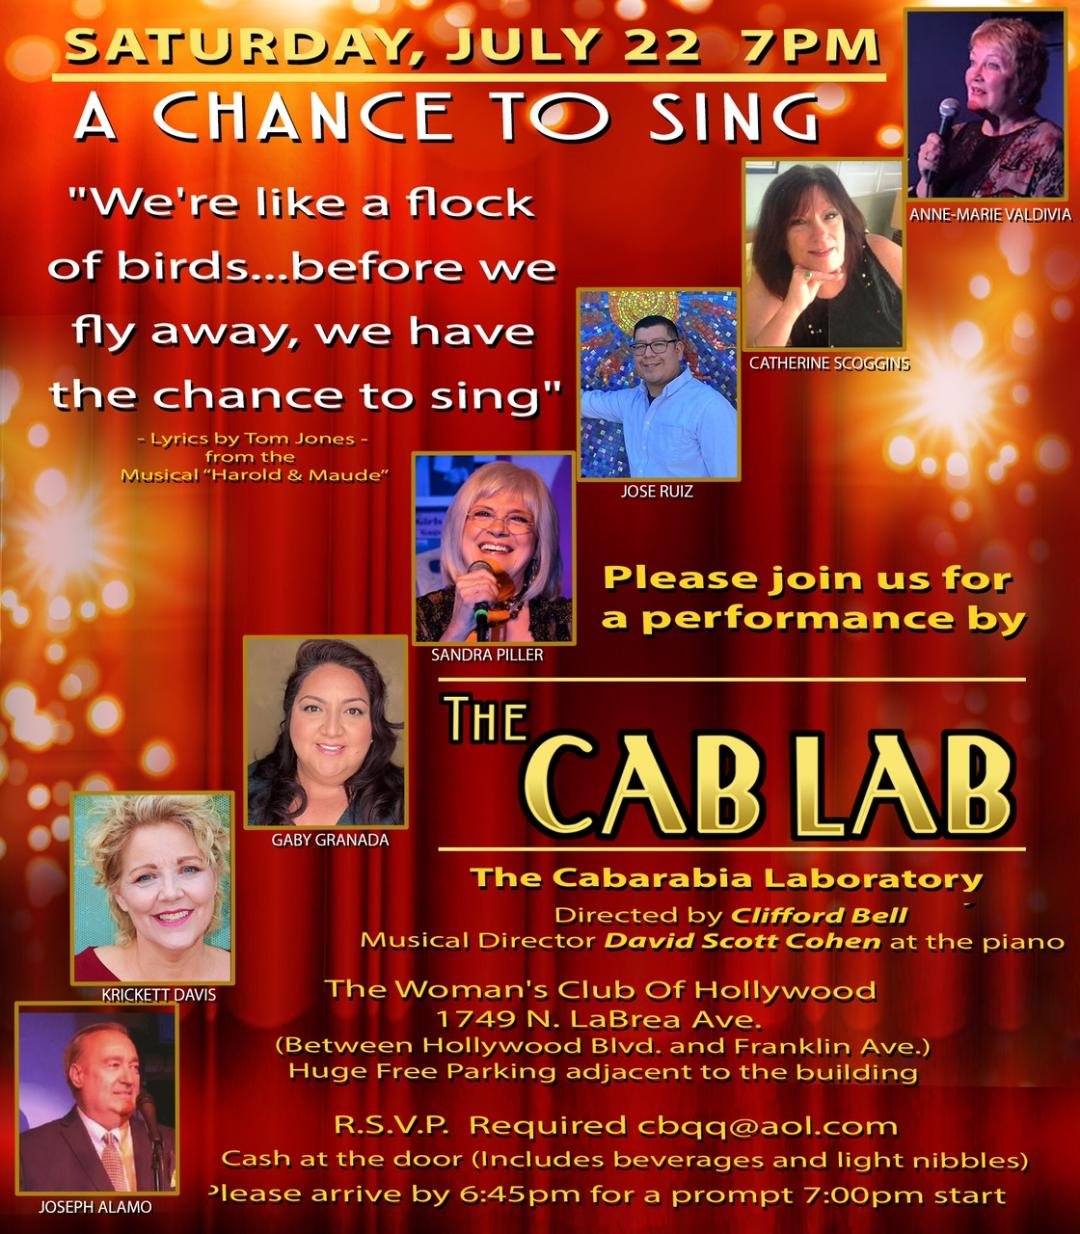 CAB LAB A CHANCE TO SING JULY 22 SECOND GROUP THINNER.jpg